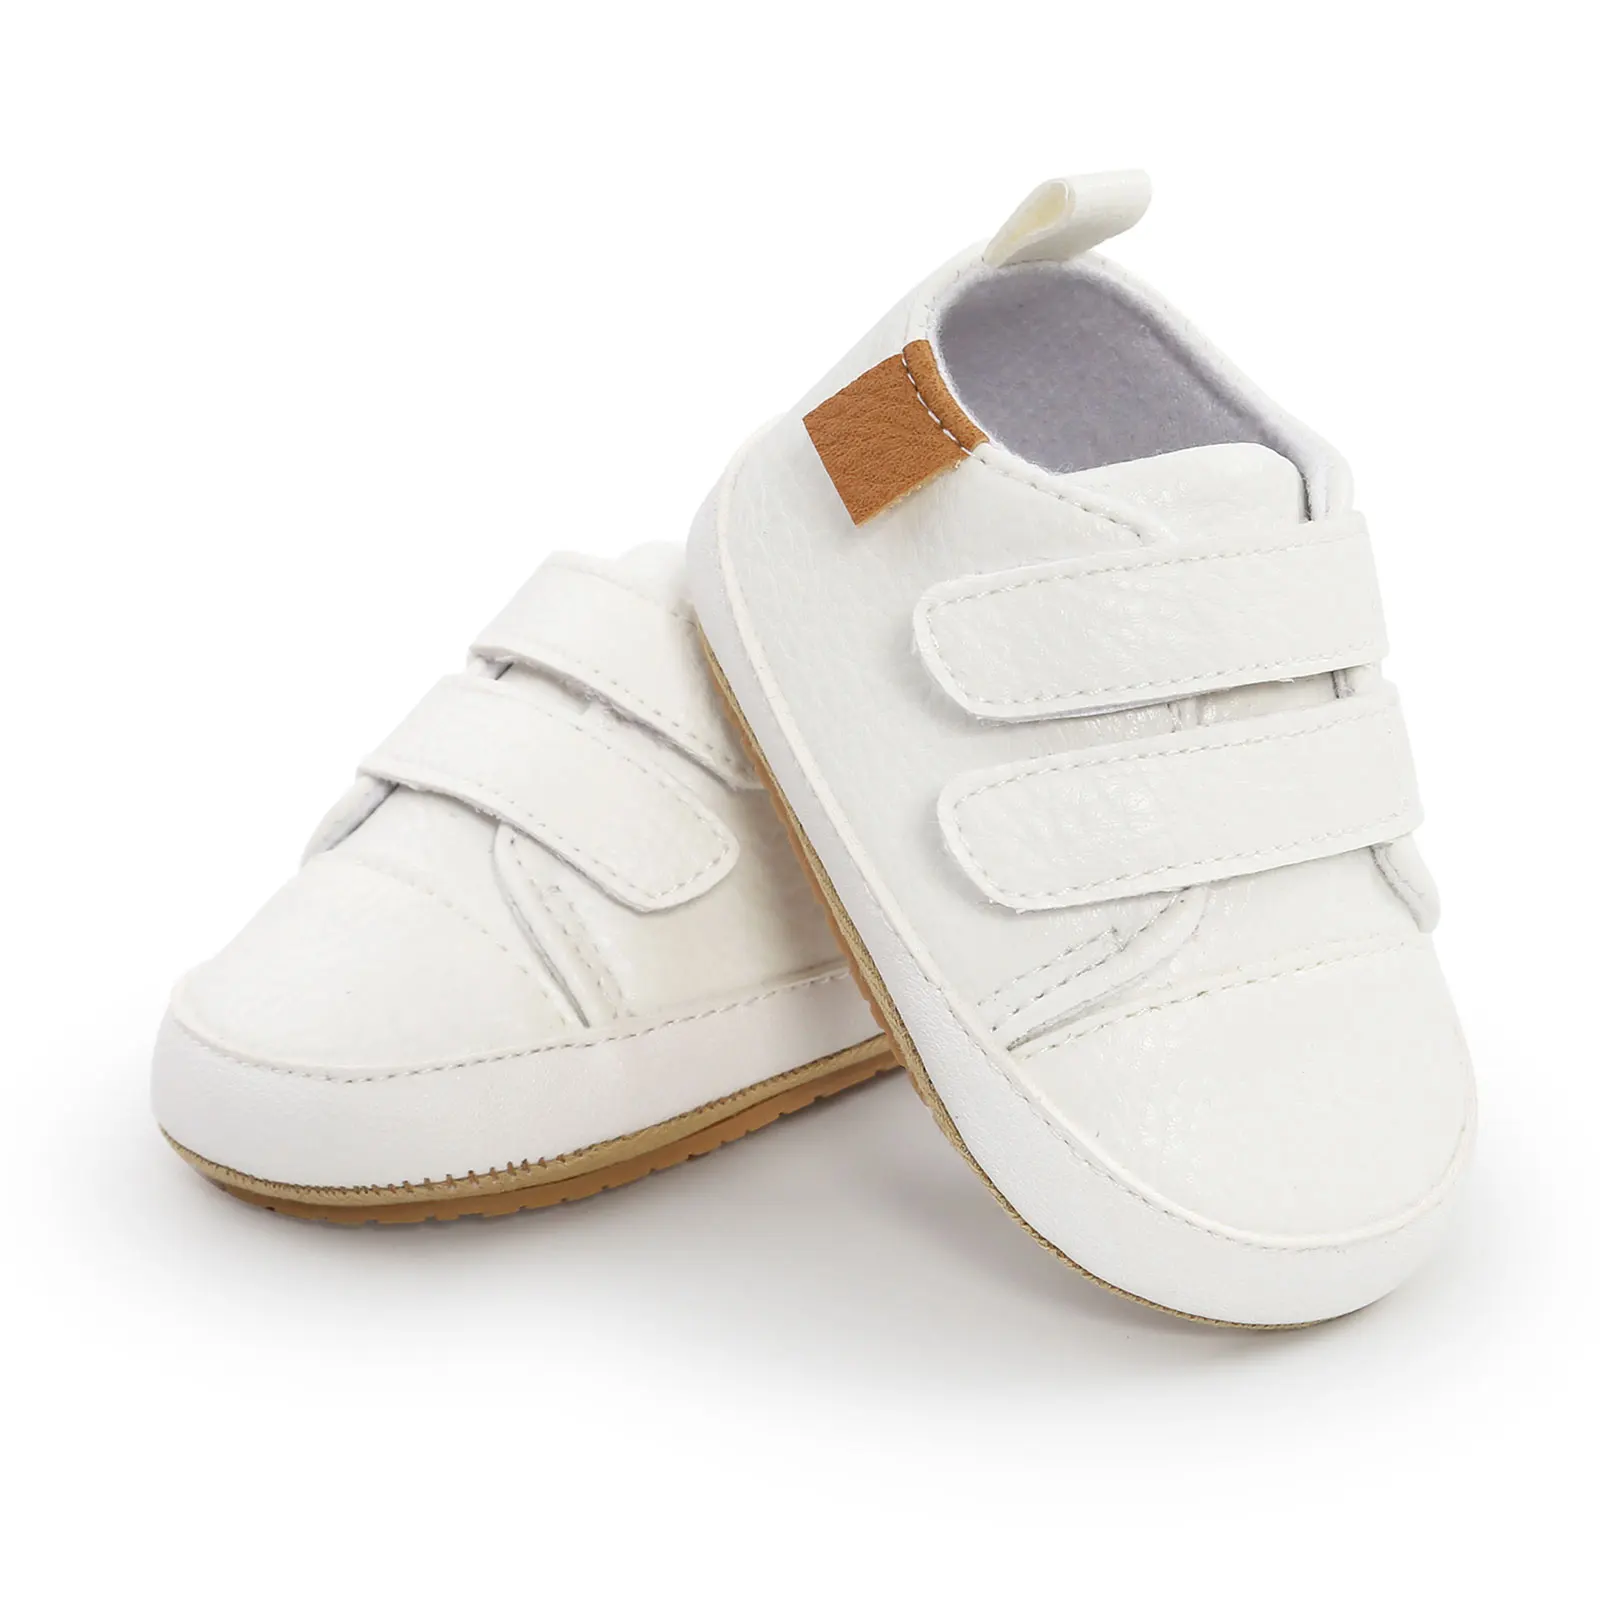 

0-18Months Newborn Infant Baby Boy Girl Shoes First Walkers Casual Non-slip Autumn Spring Crib Shoes